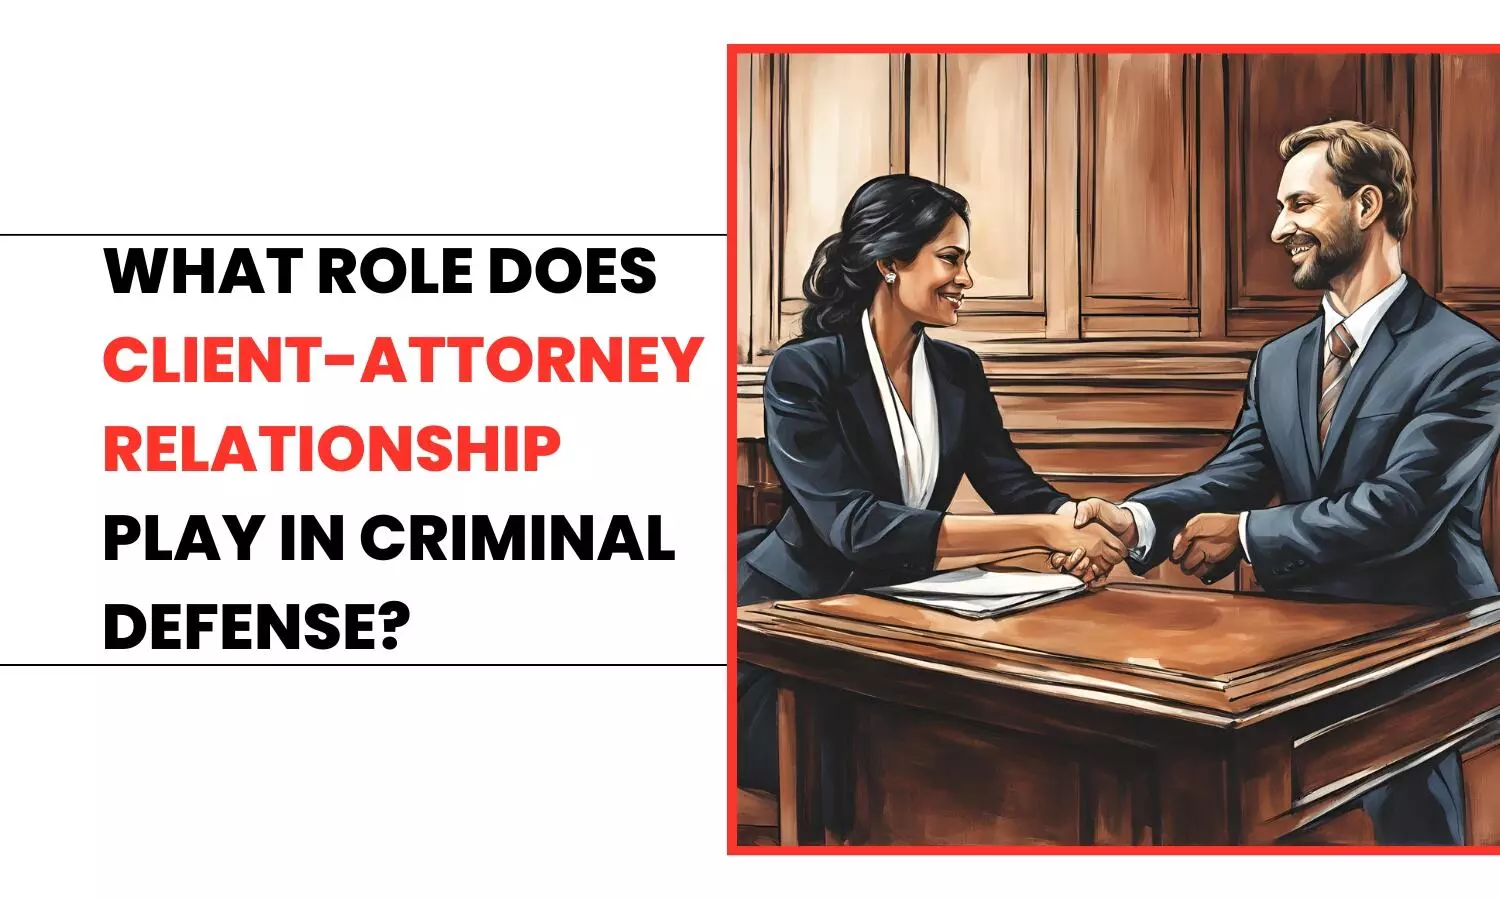 What Role Does Client-Attorney Relationship Play in Criminal Defense?